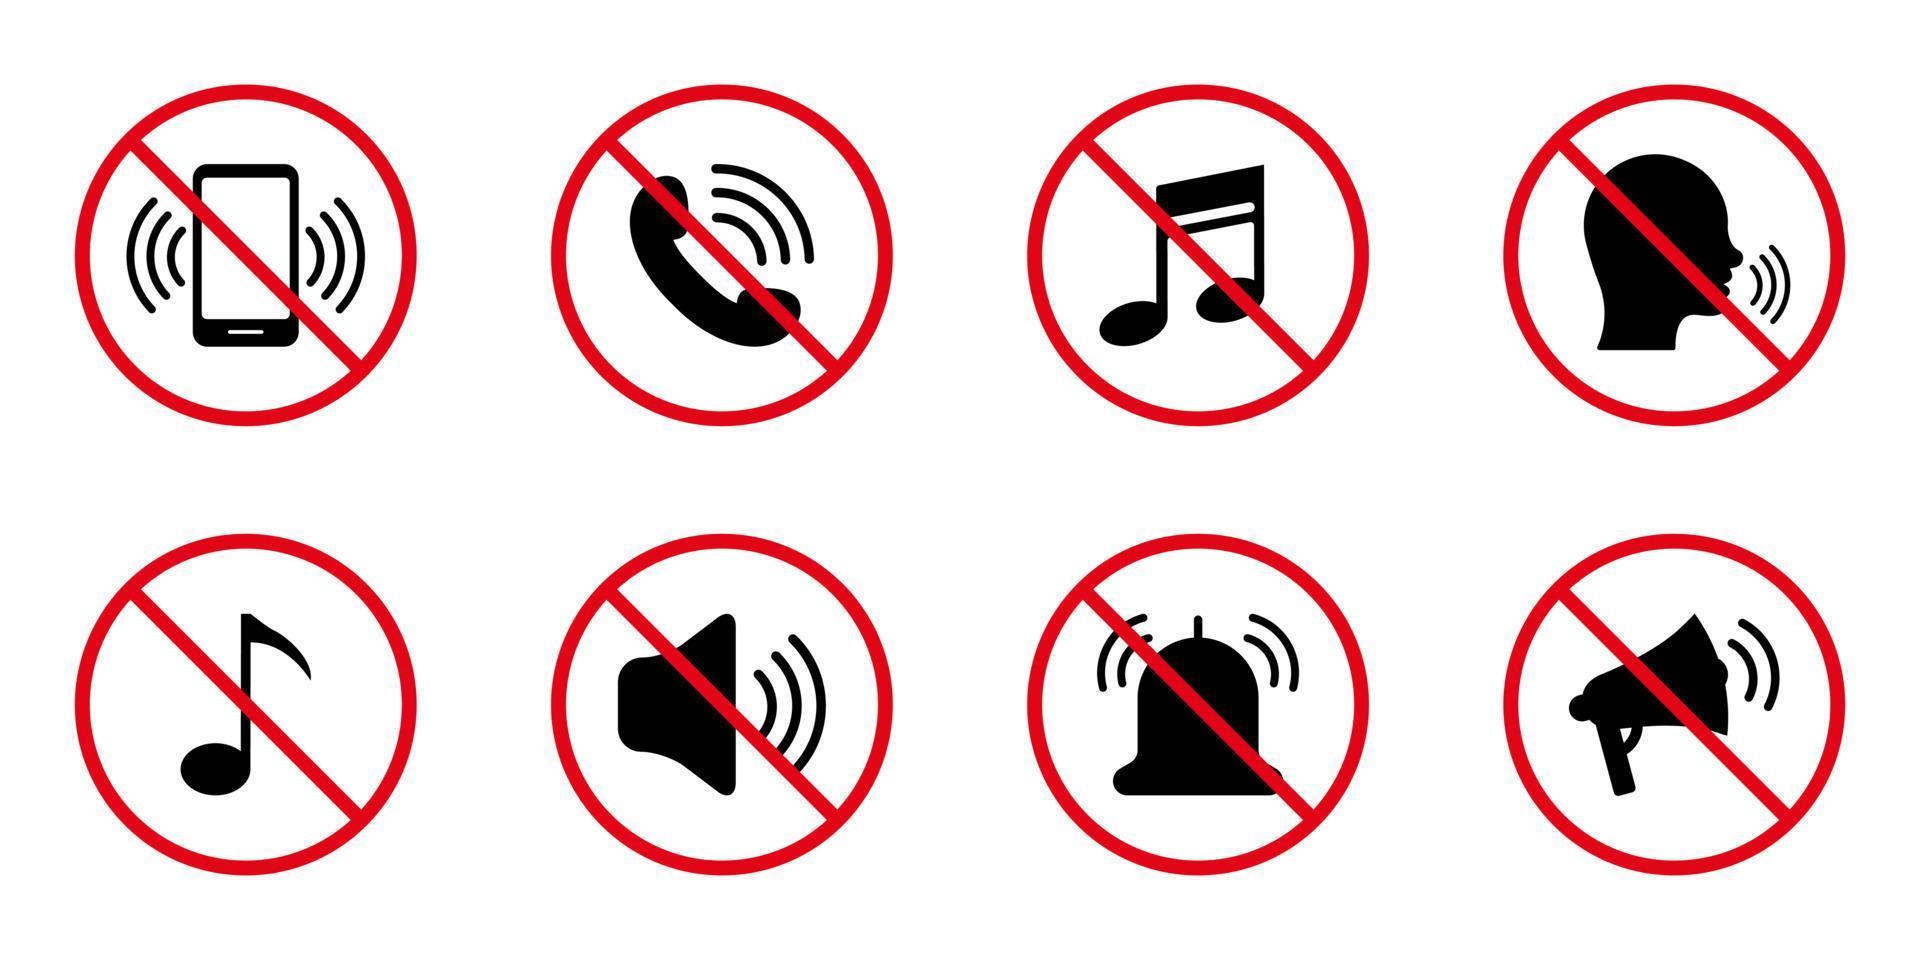 Silence Mute Black Silhouette Icon Set. Forbidden Loud Sound Voice Pictogram. Ban Noise Phone Loudspeaker Sound Red Stop Symbol. Call Prohibited Notice. Quiet Mode Icon. Isolated Vector Illustration.